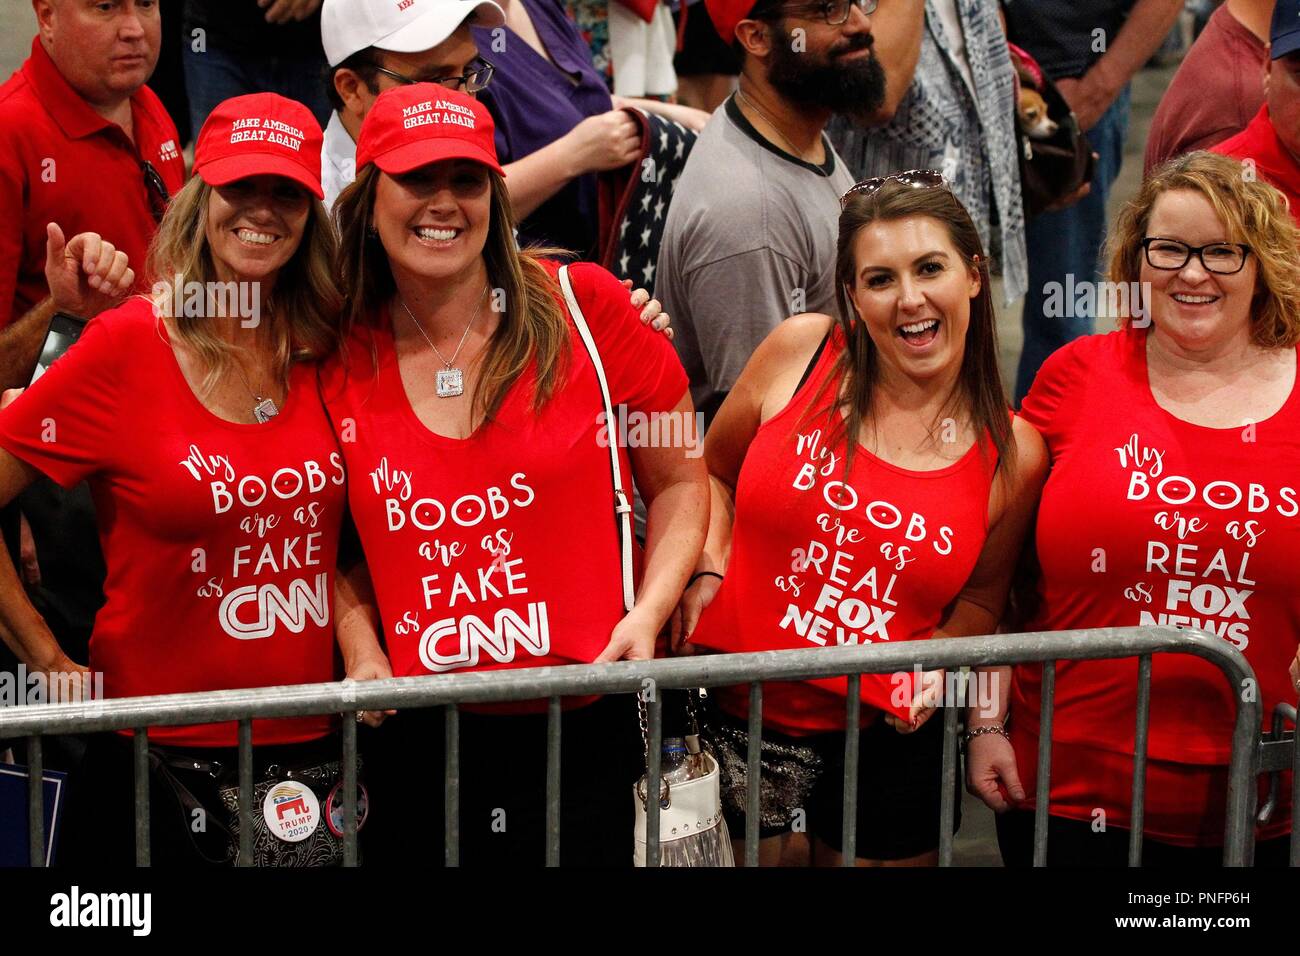 Donald Trump supporters at a public appearance for President Donald Trump Make America Great Again Rally, Las Vegas Convention Center, Las Vegas, NV September 20, 2018. Photo By: JA/Everett Collection Stock Photo